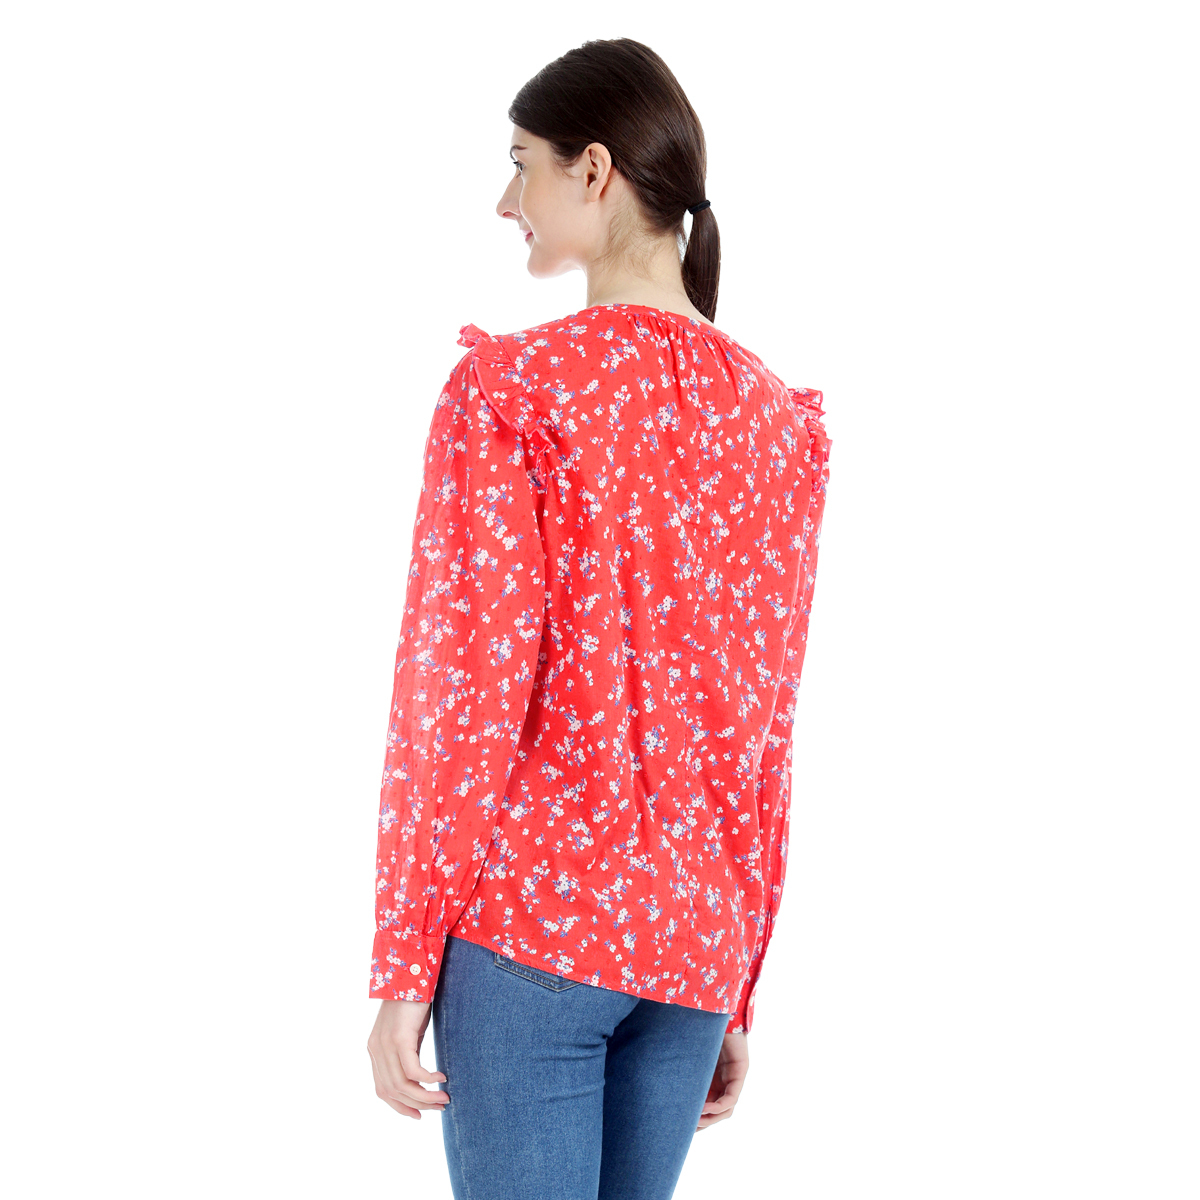 Gap Floral Printed Notch Round Neck Full Sleeve Top with Pleating details All Over - Coral